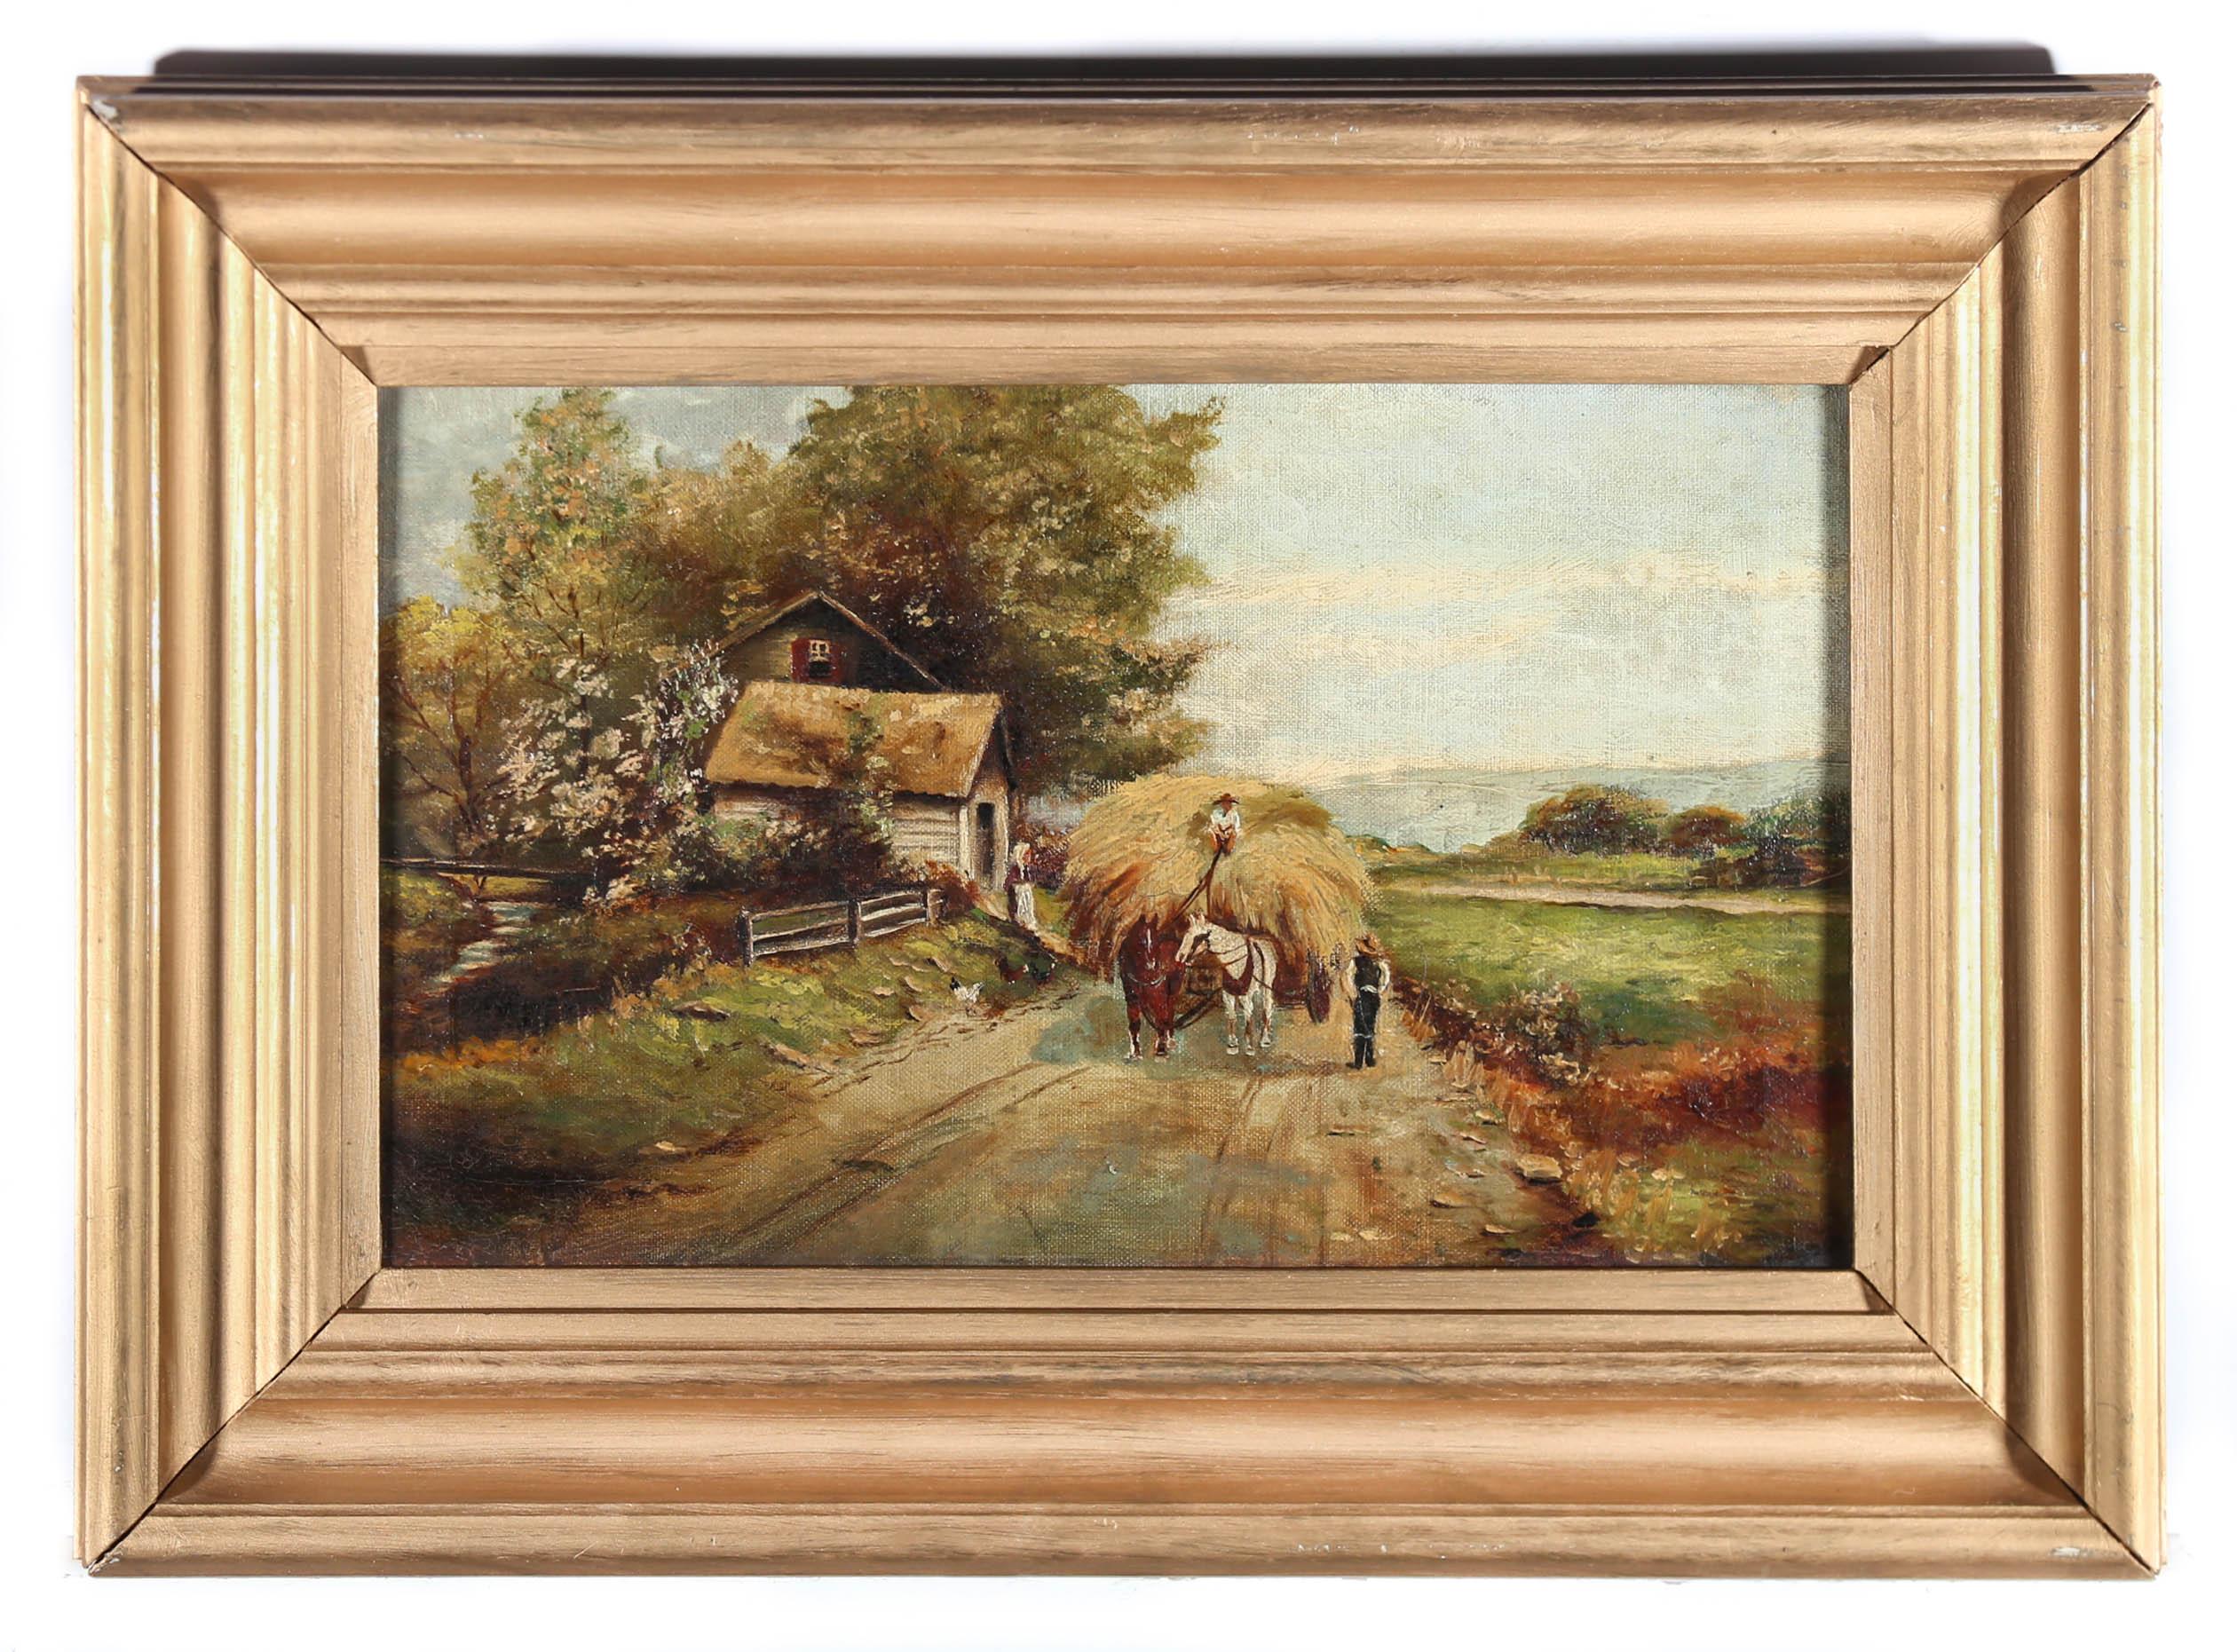 A charming early 20th century oil depicting the seasonal task of bring in the hay. Here, a farmhand can be seen riding the hay cart back to the yard along a picturesque country lane. Another helper can be seen walking on foot, keeping a close eye on